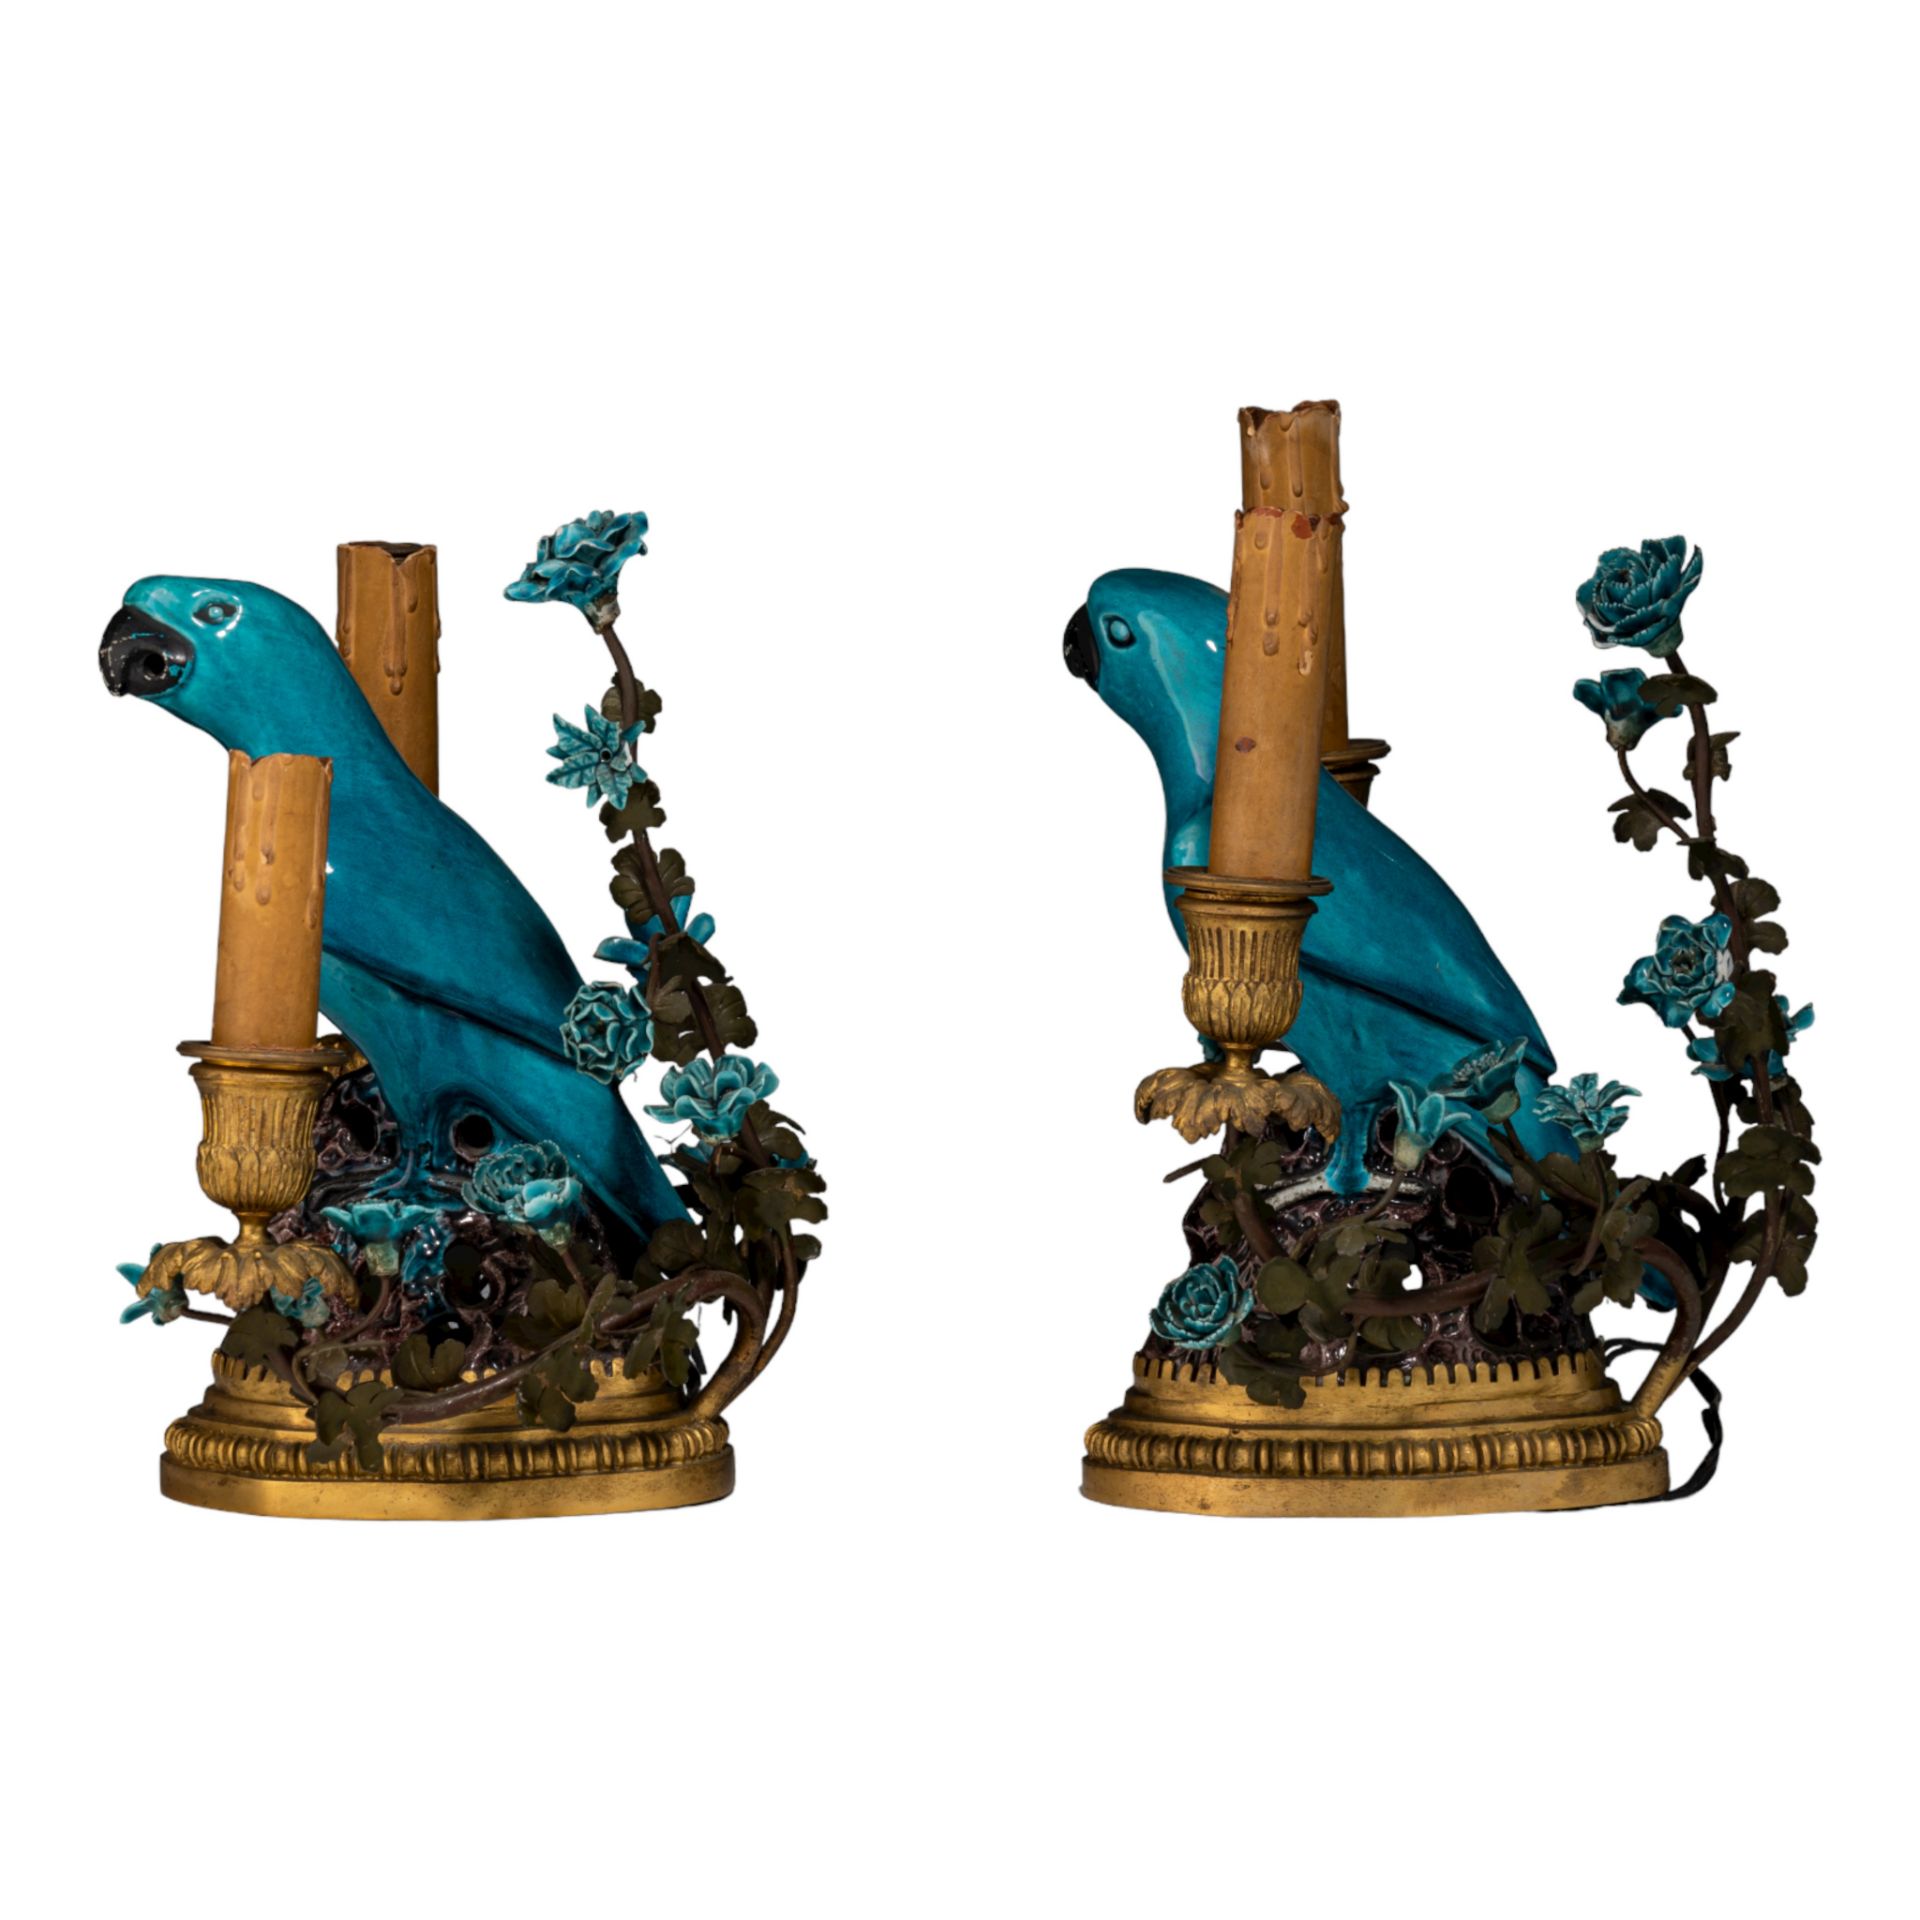 A pair of table lamps, brass-mounted porcelain parrots, marked Samson, late 19thC, H 26 - 28 cm - Image 3 of 12